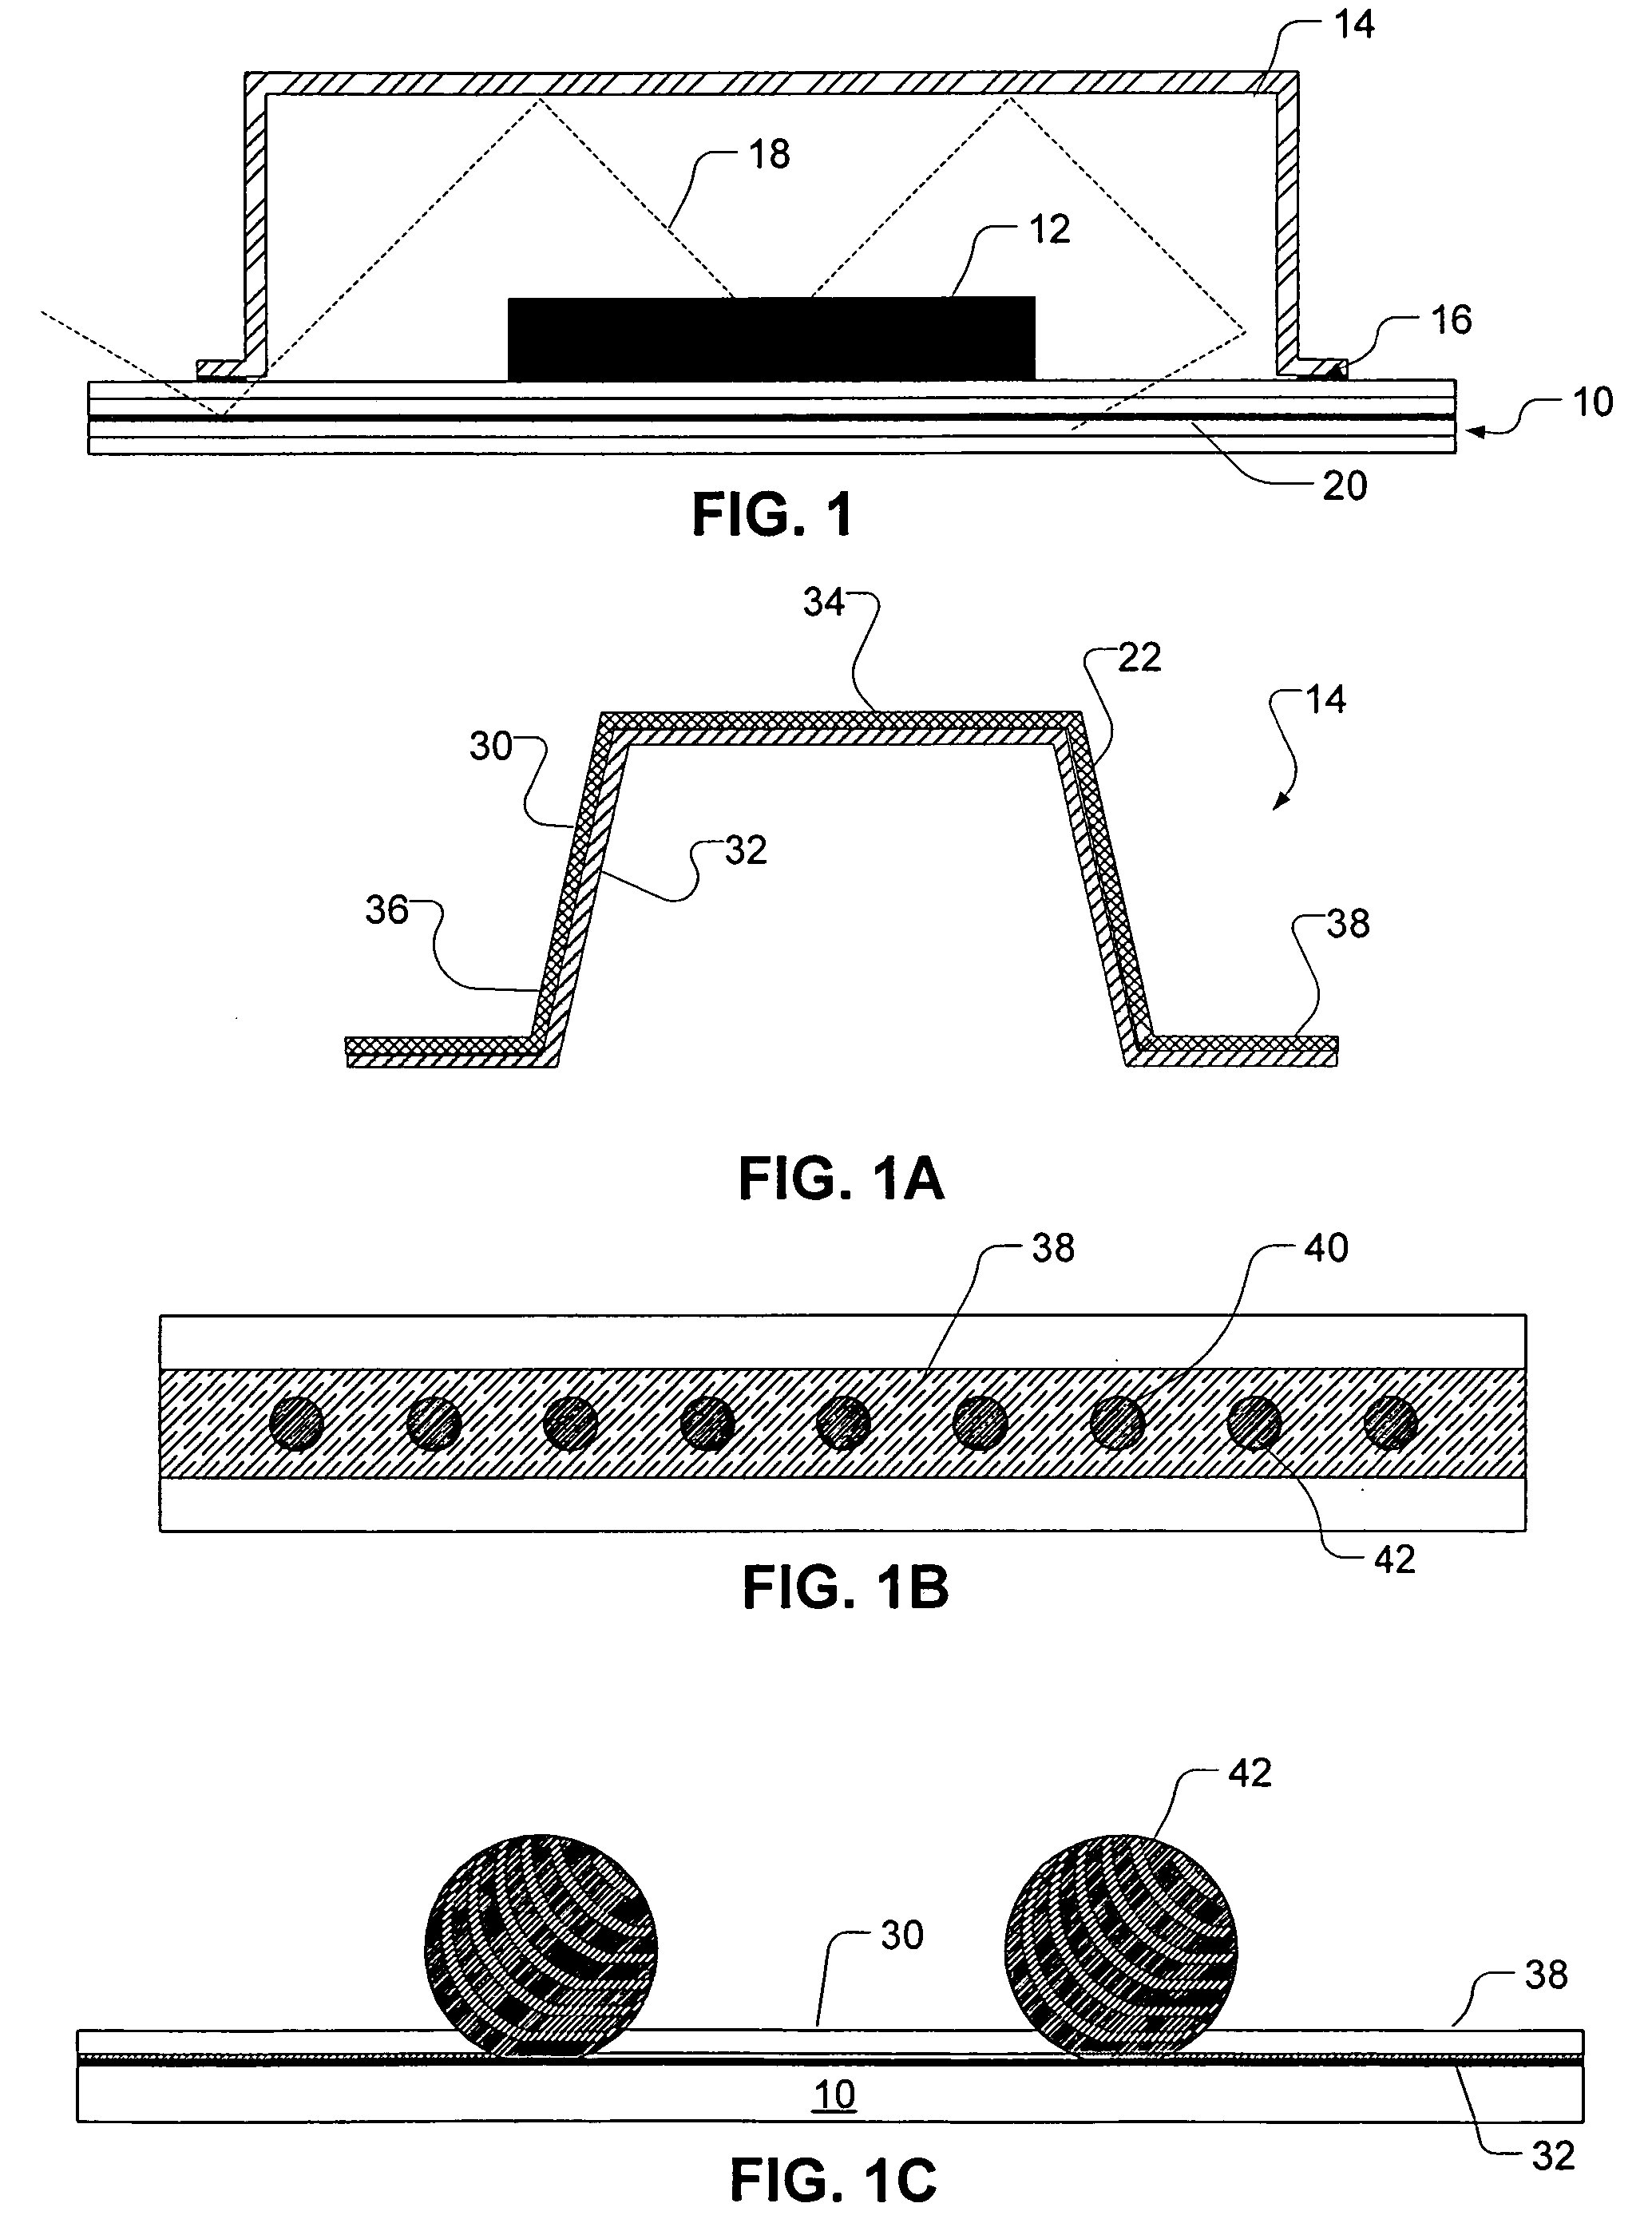 EMI absorbing shielding for a printed circuit board